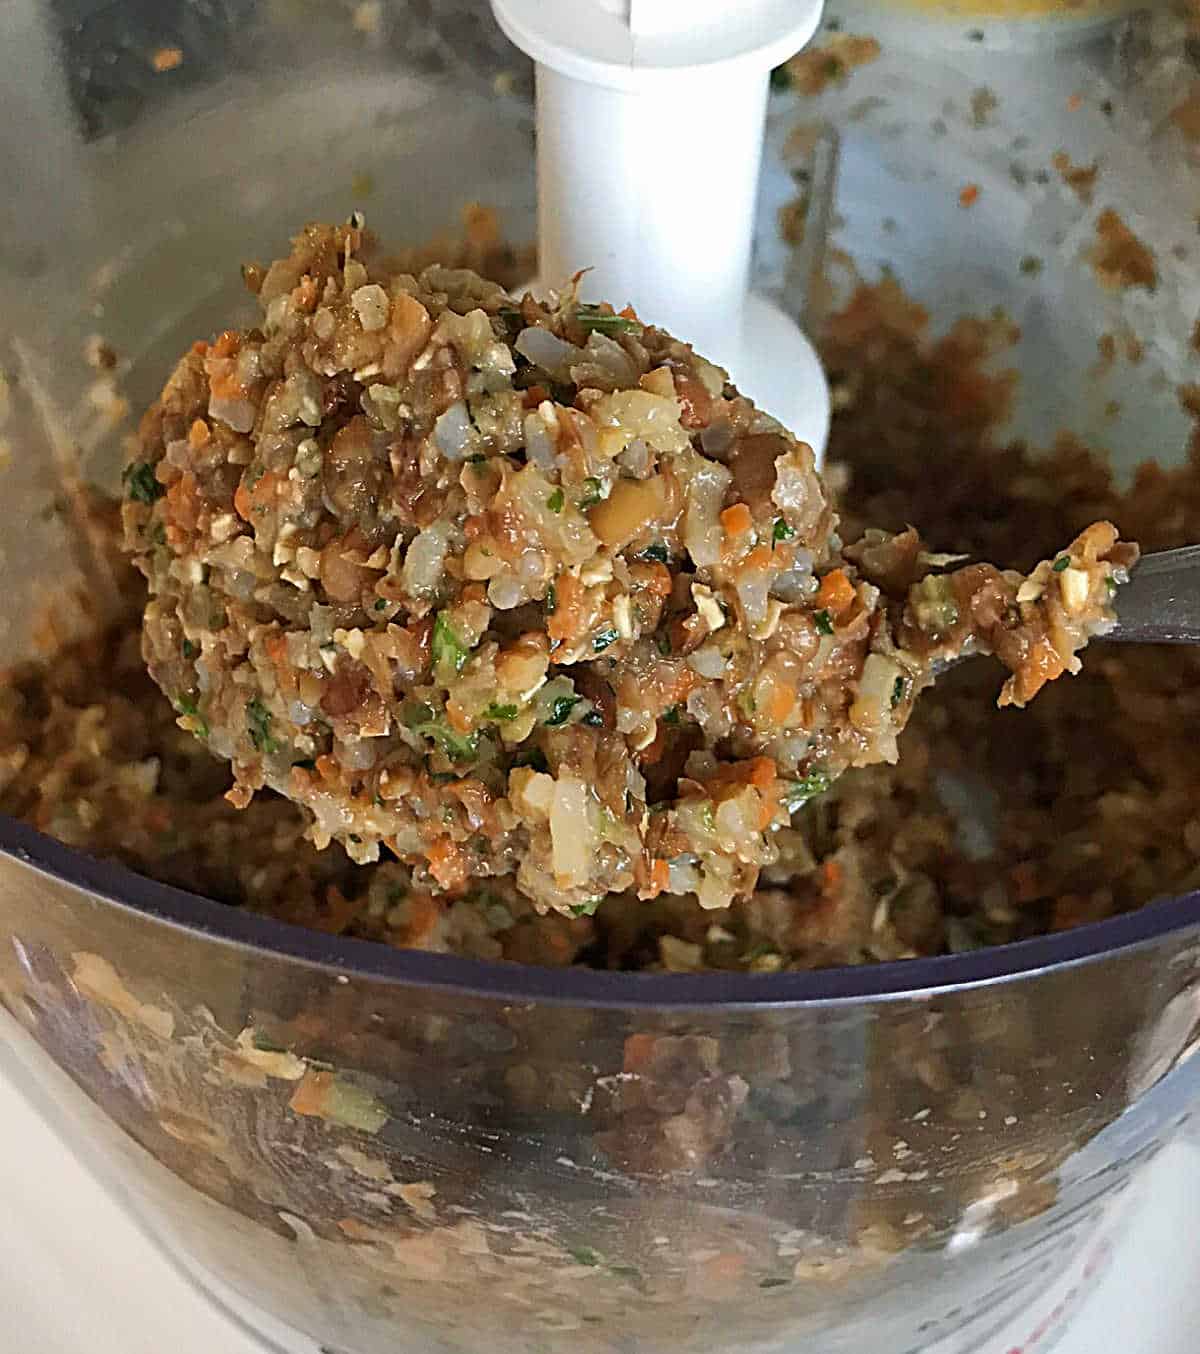 Thick scoop of lentil burger mixture on a spoon